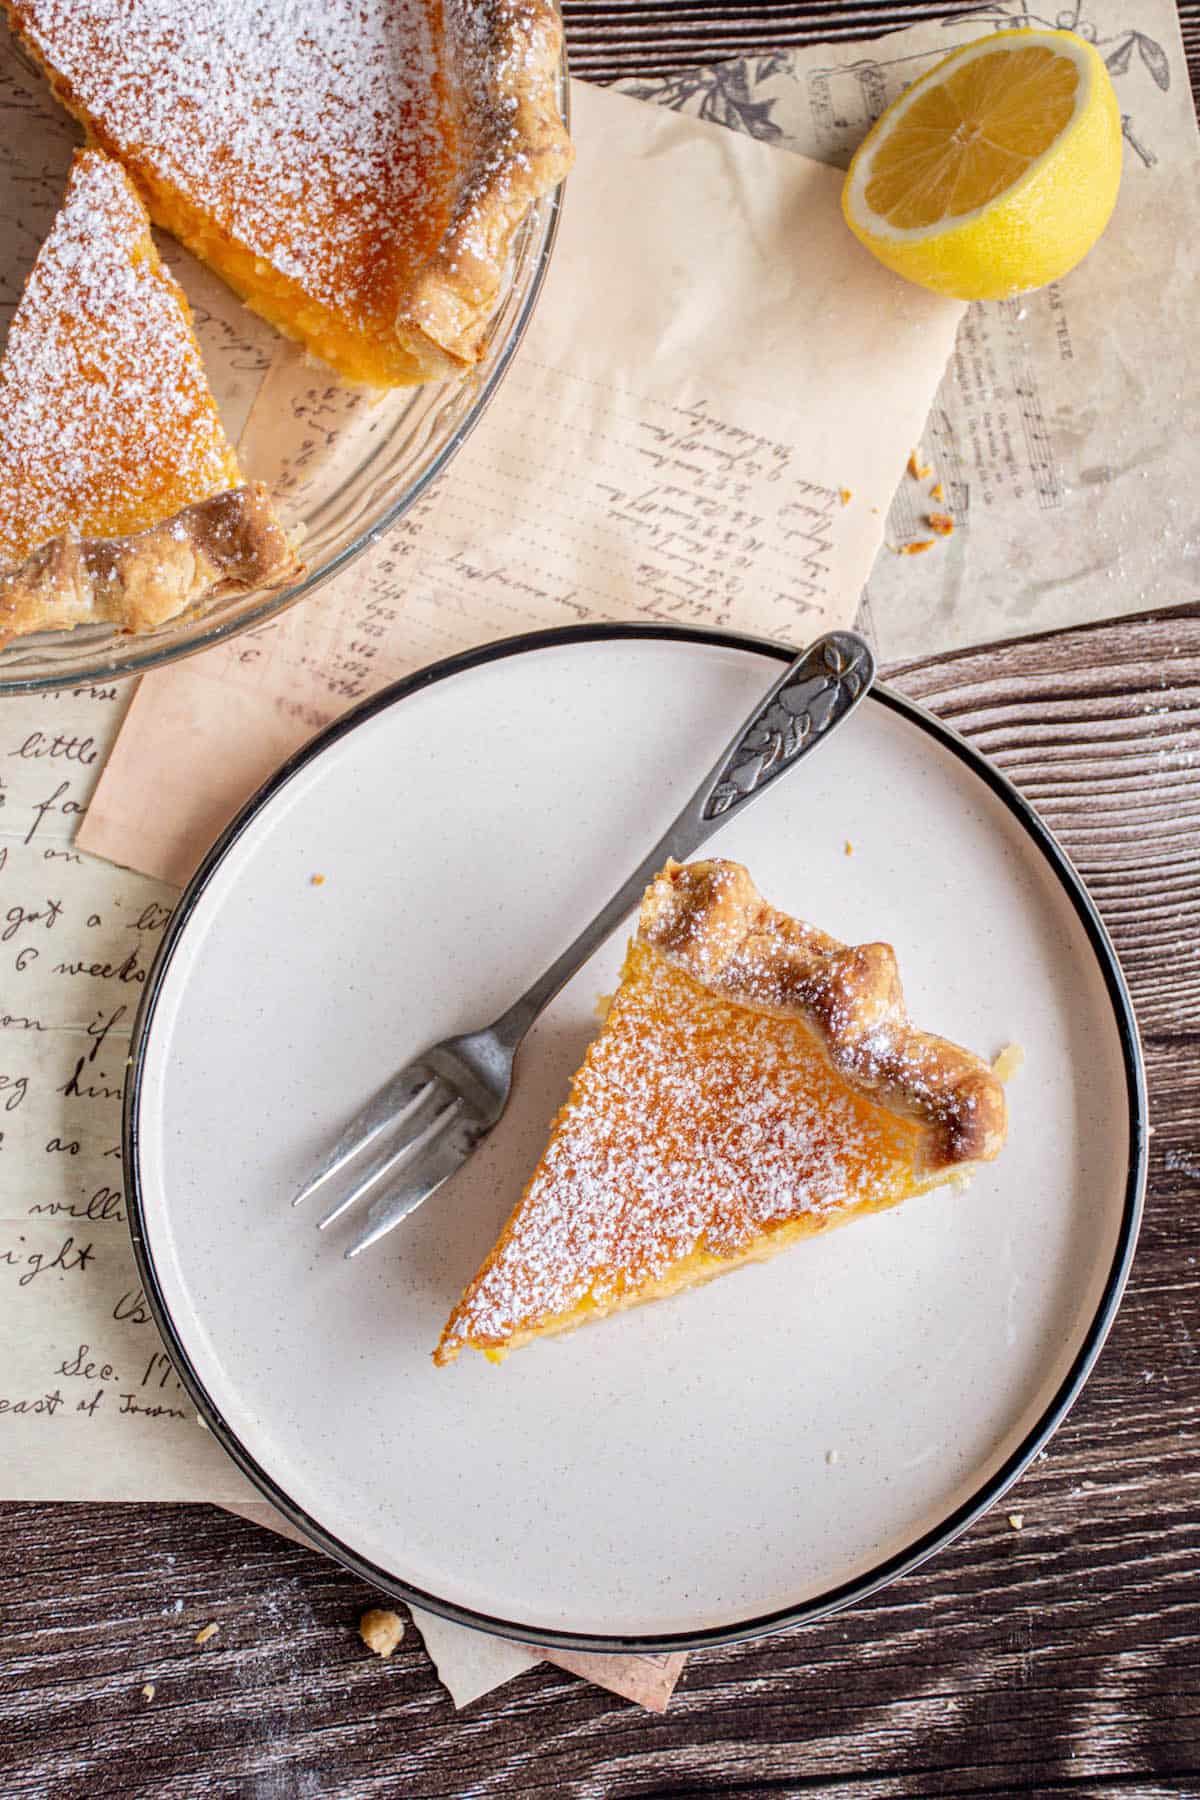 Bird's eye view of a lemon pie on wooden table.